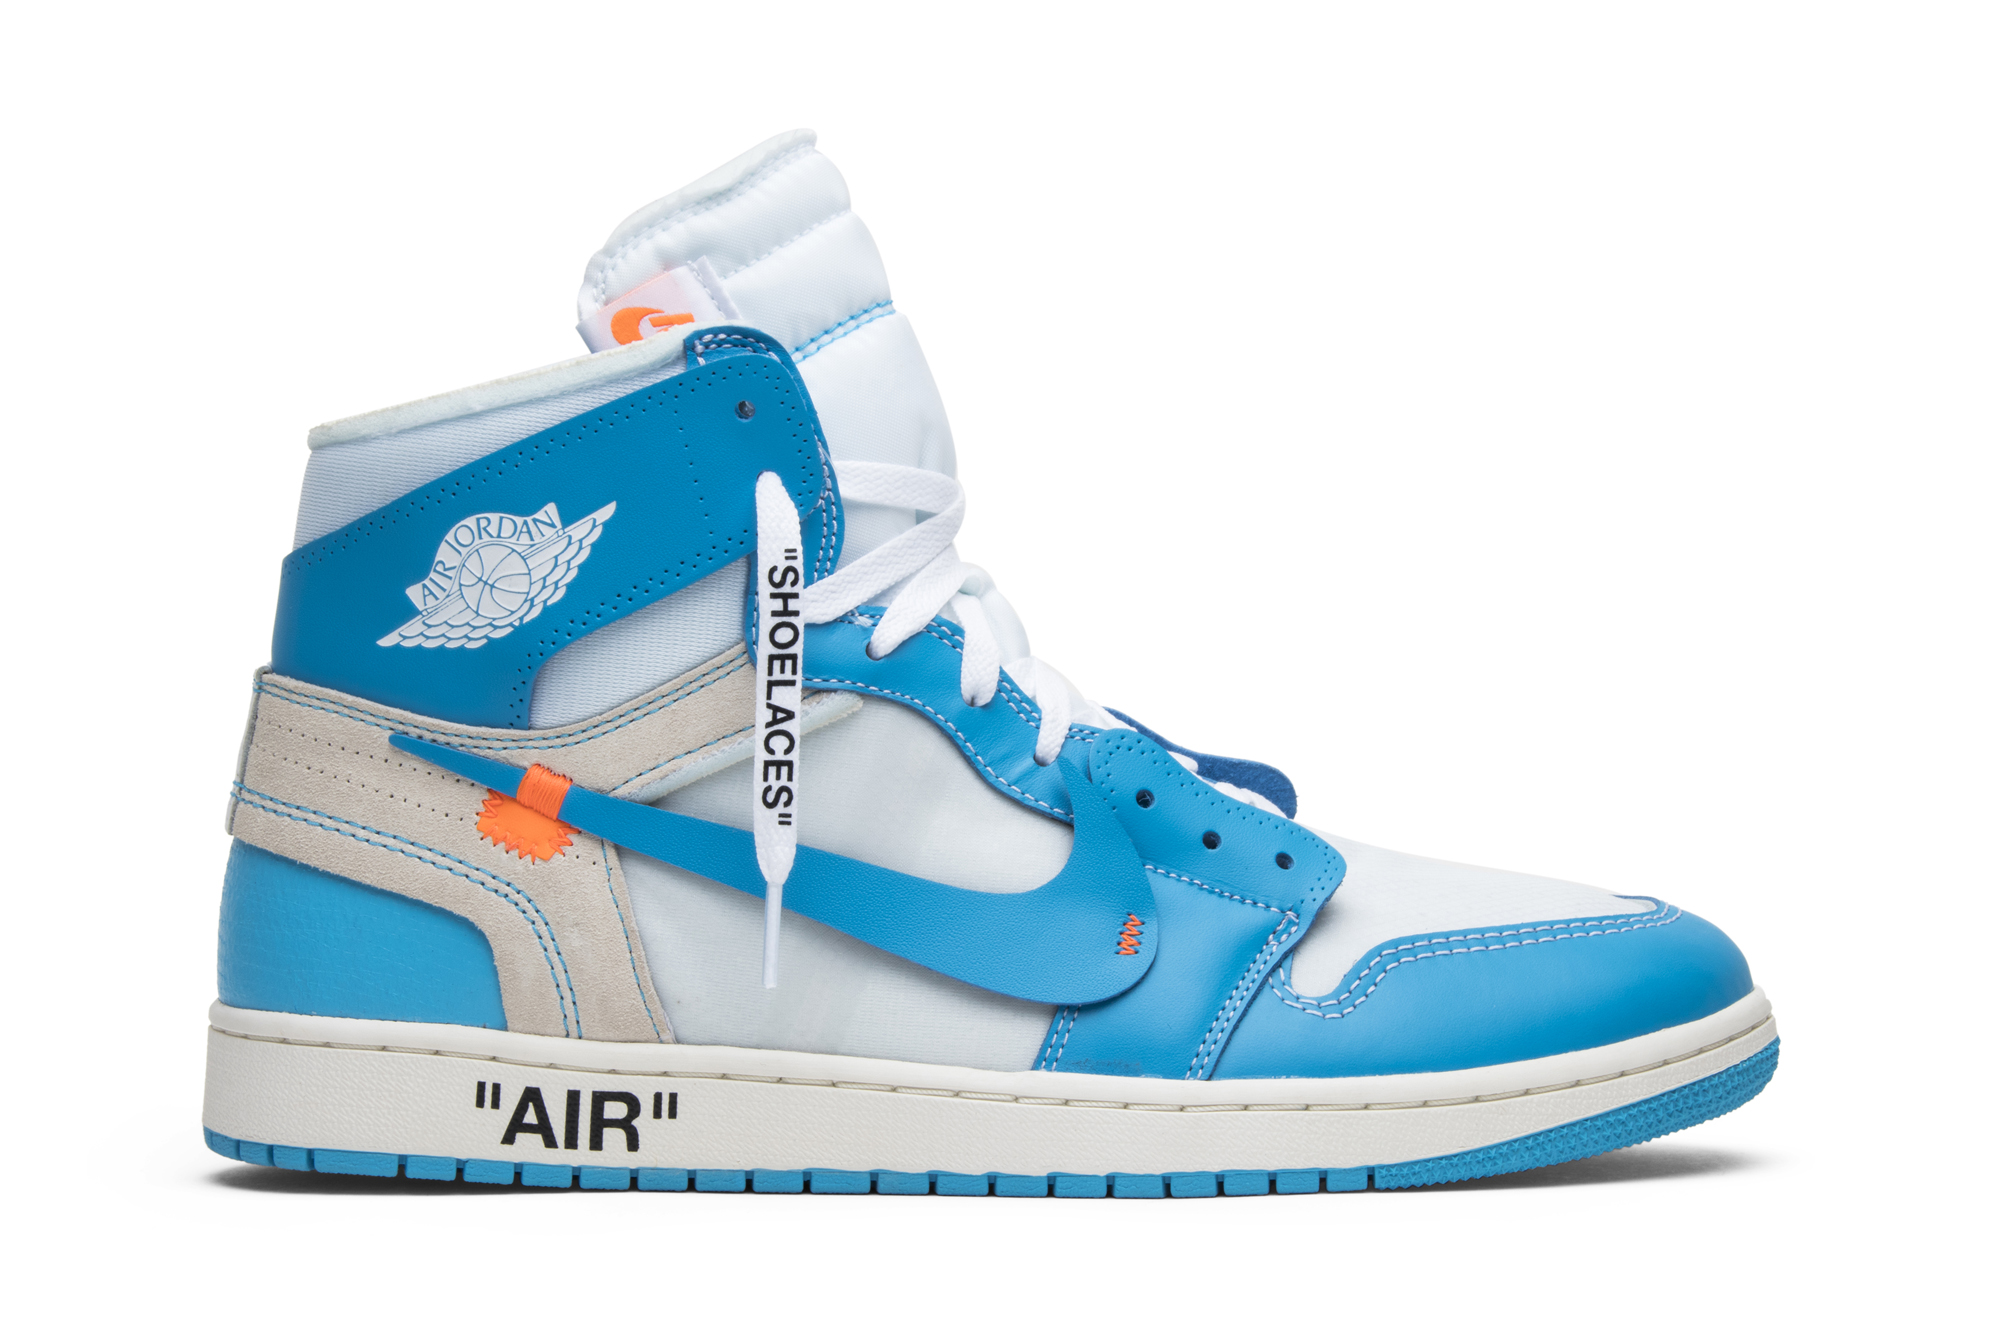 MY NEW FAVORITE OFF WHITE JORDAN SNEAKERS! (The Best Ever?) 